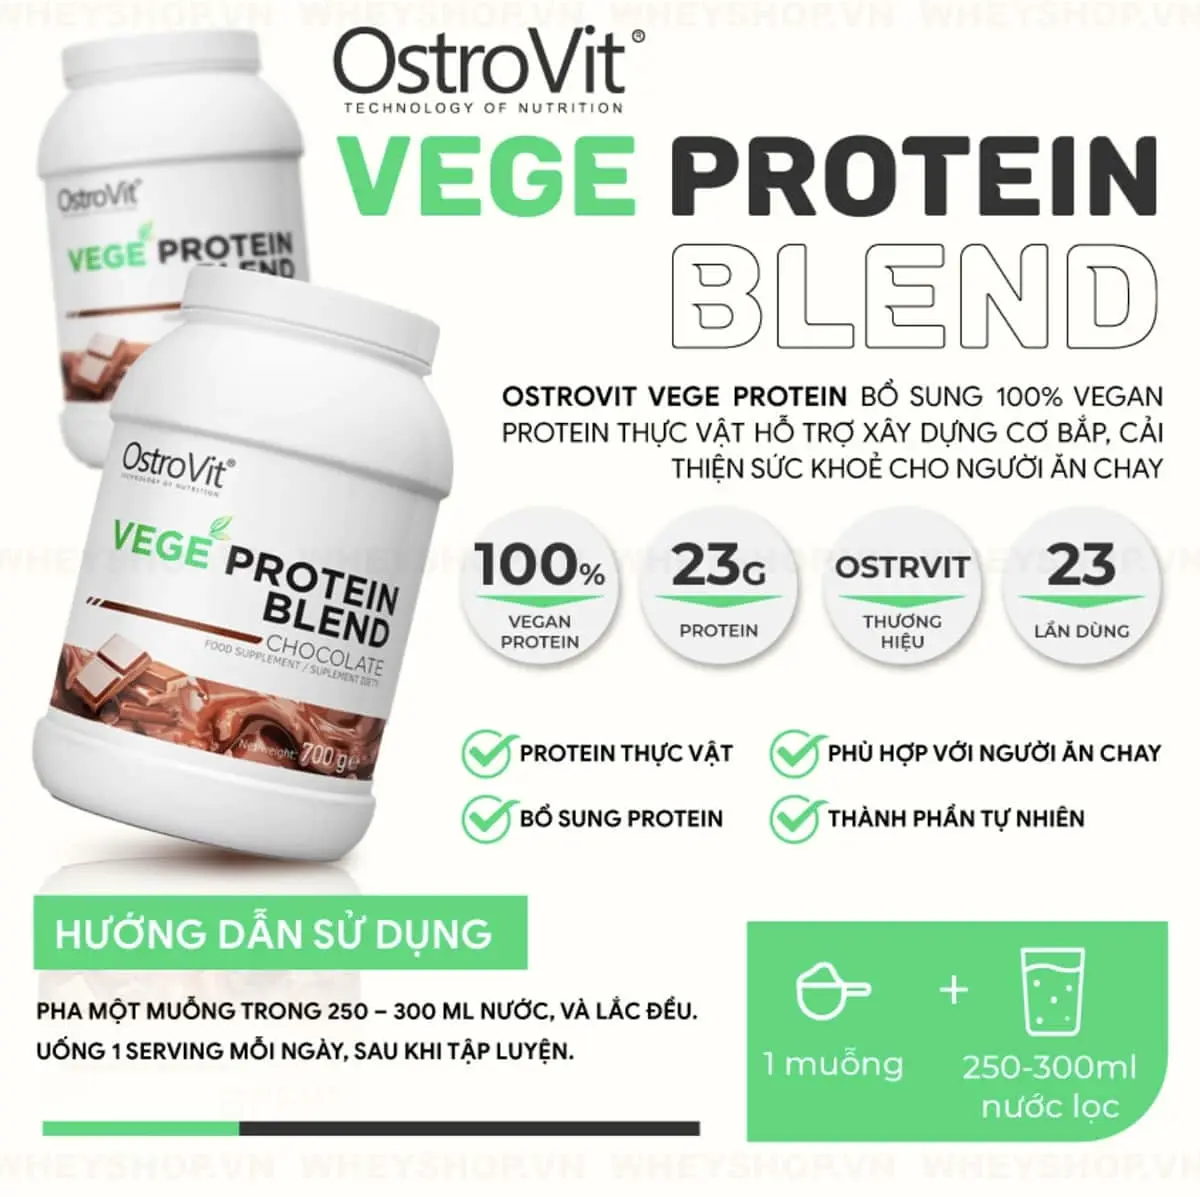 review-danh-gia-ostrovit-vege-protein-blend-co-tot-khong-4